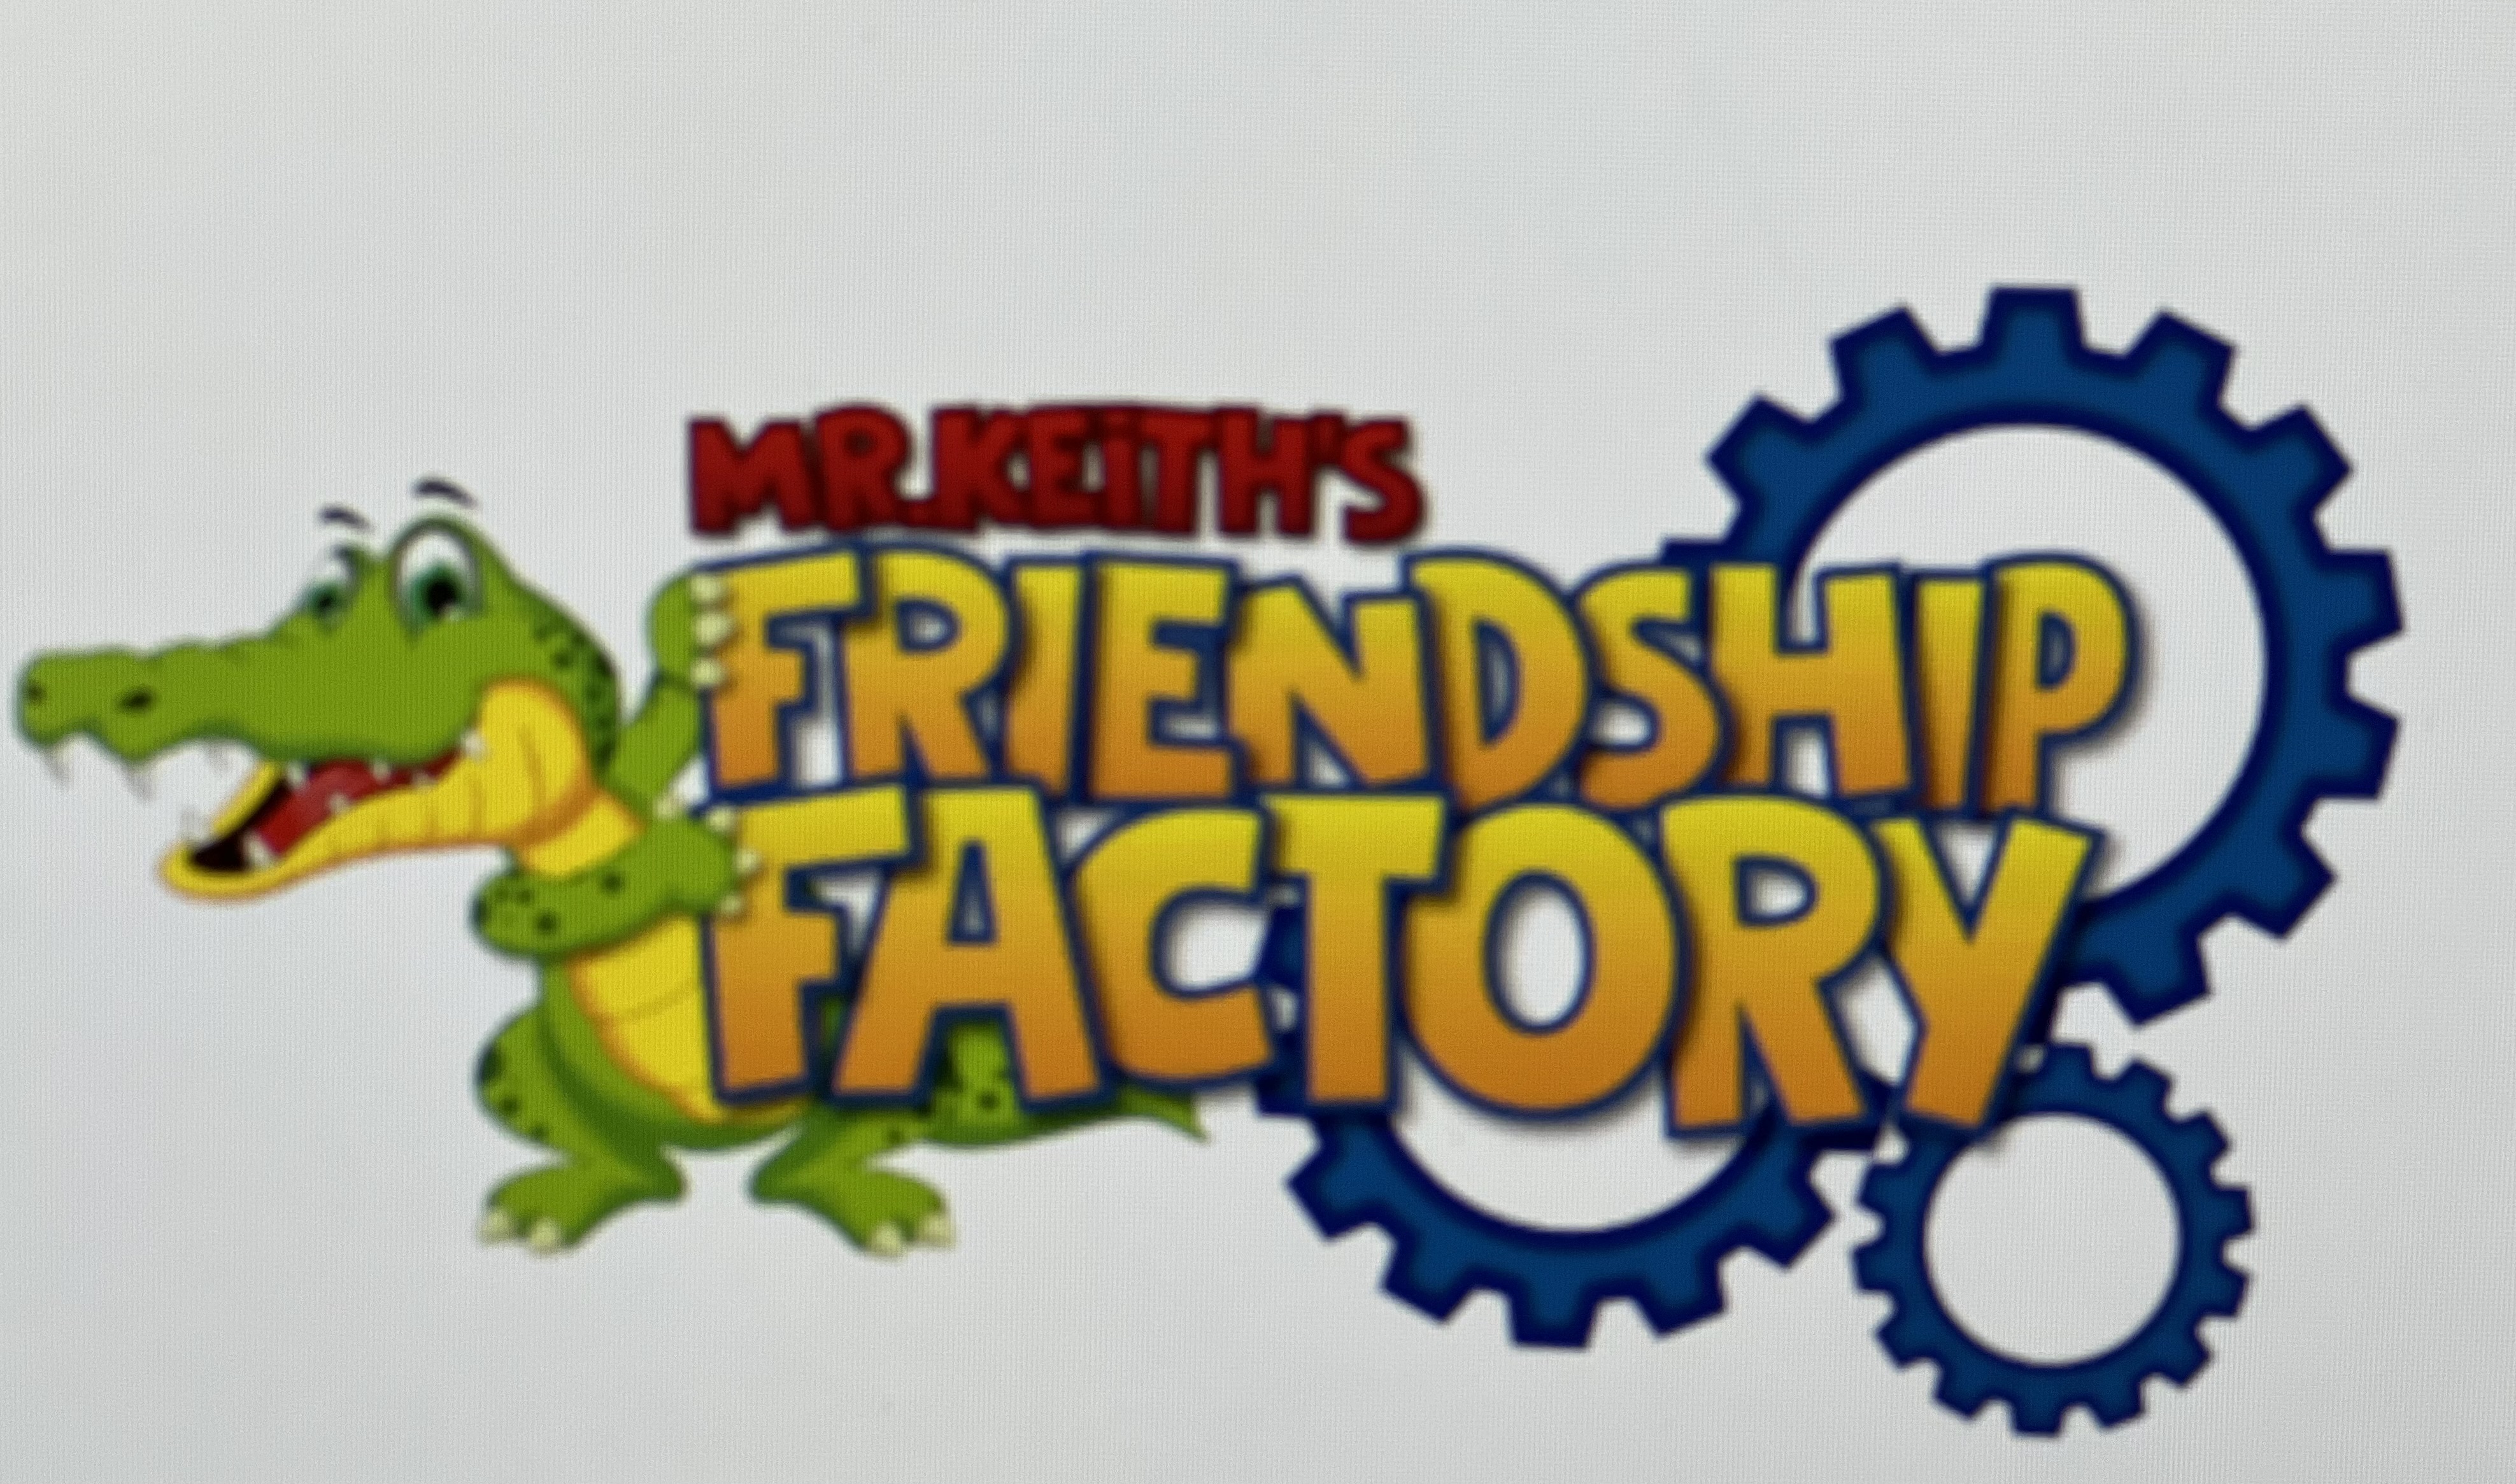 Mr. Keith's Friendship Factory